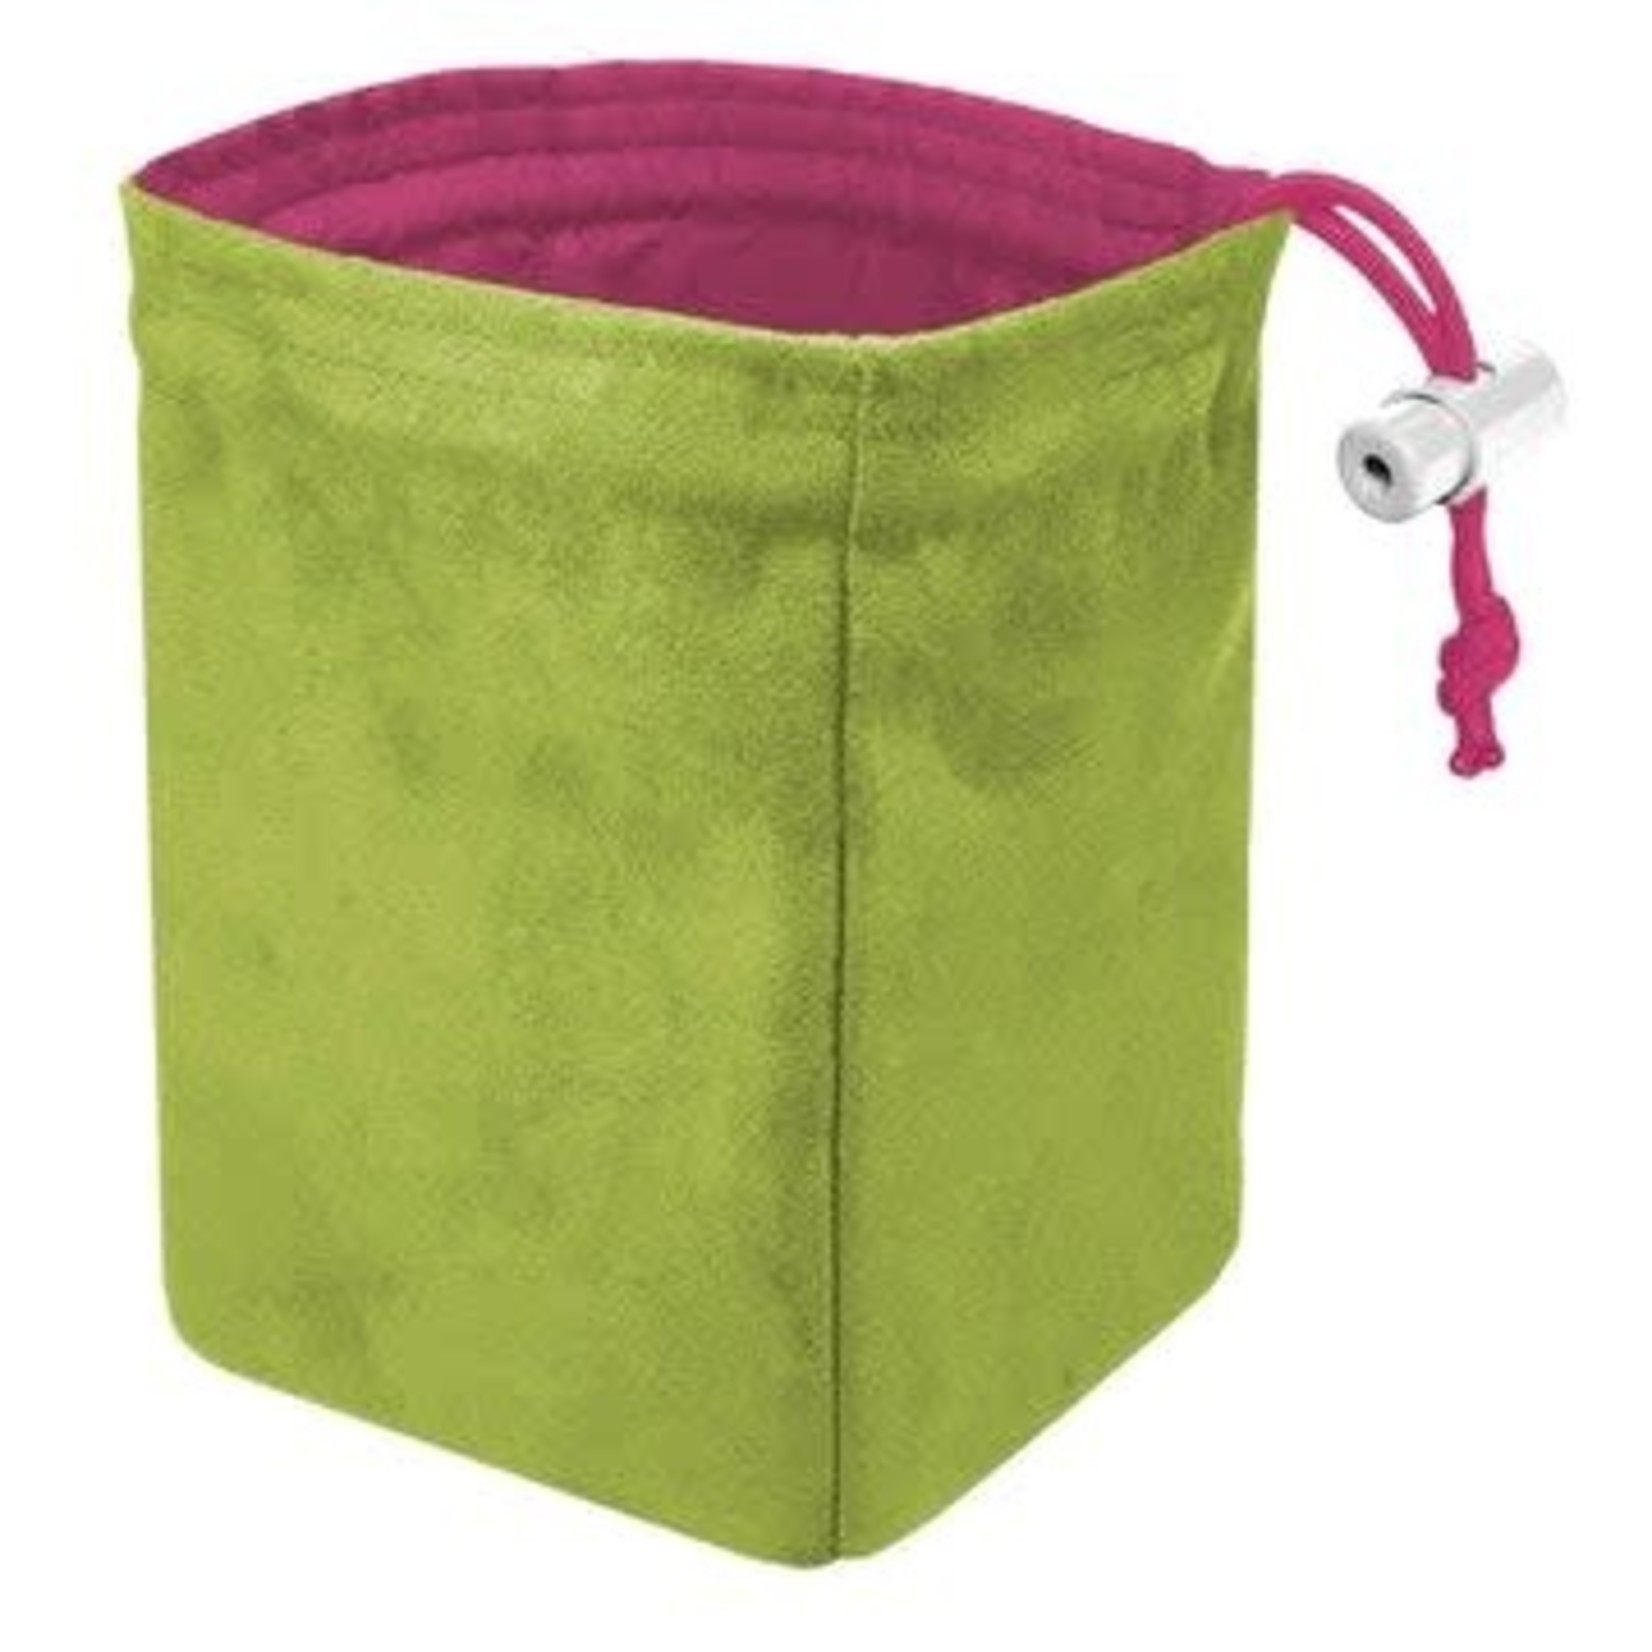 Dice Bag: Classic - Lime and Pink